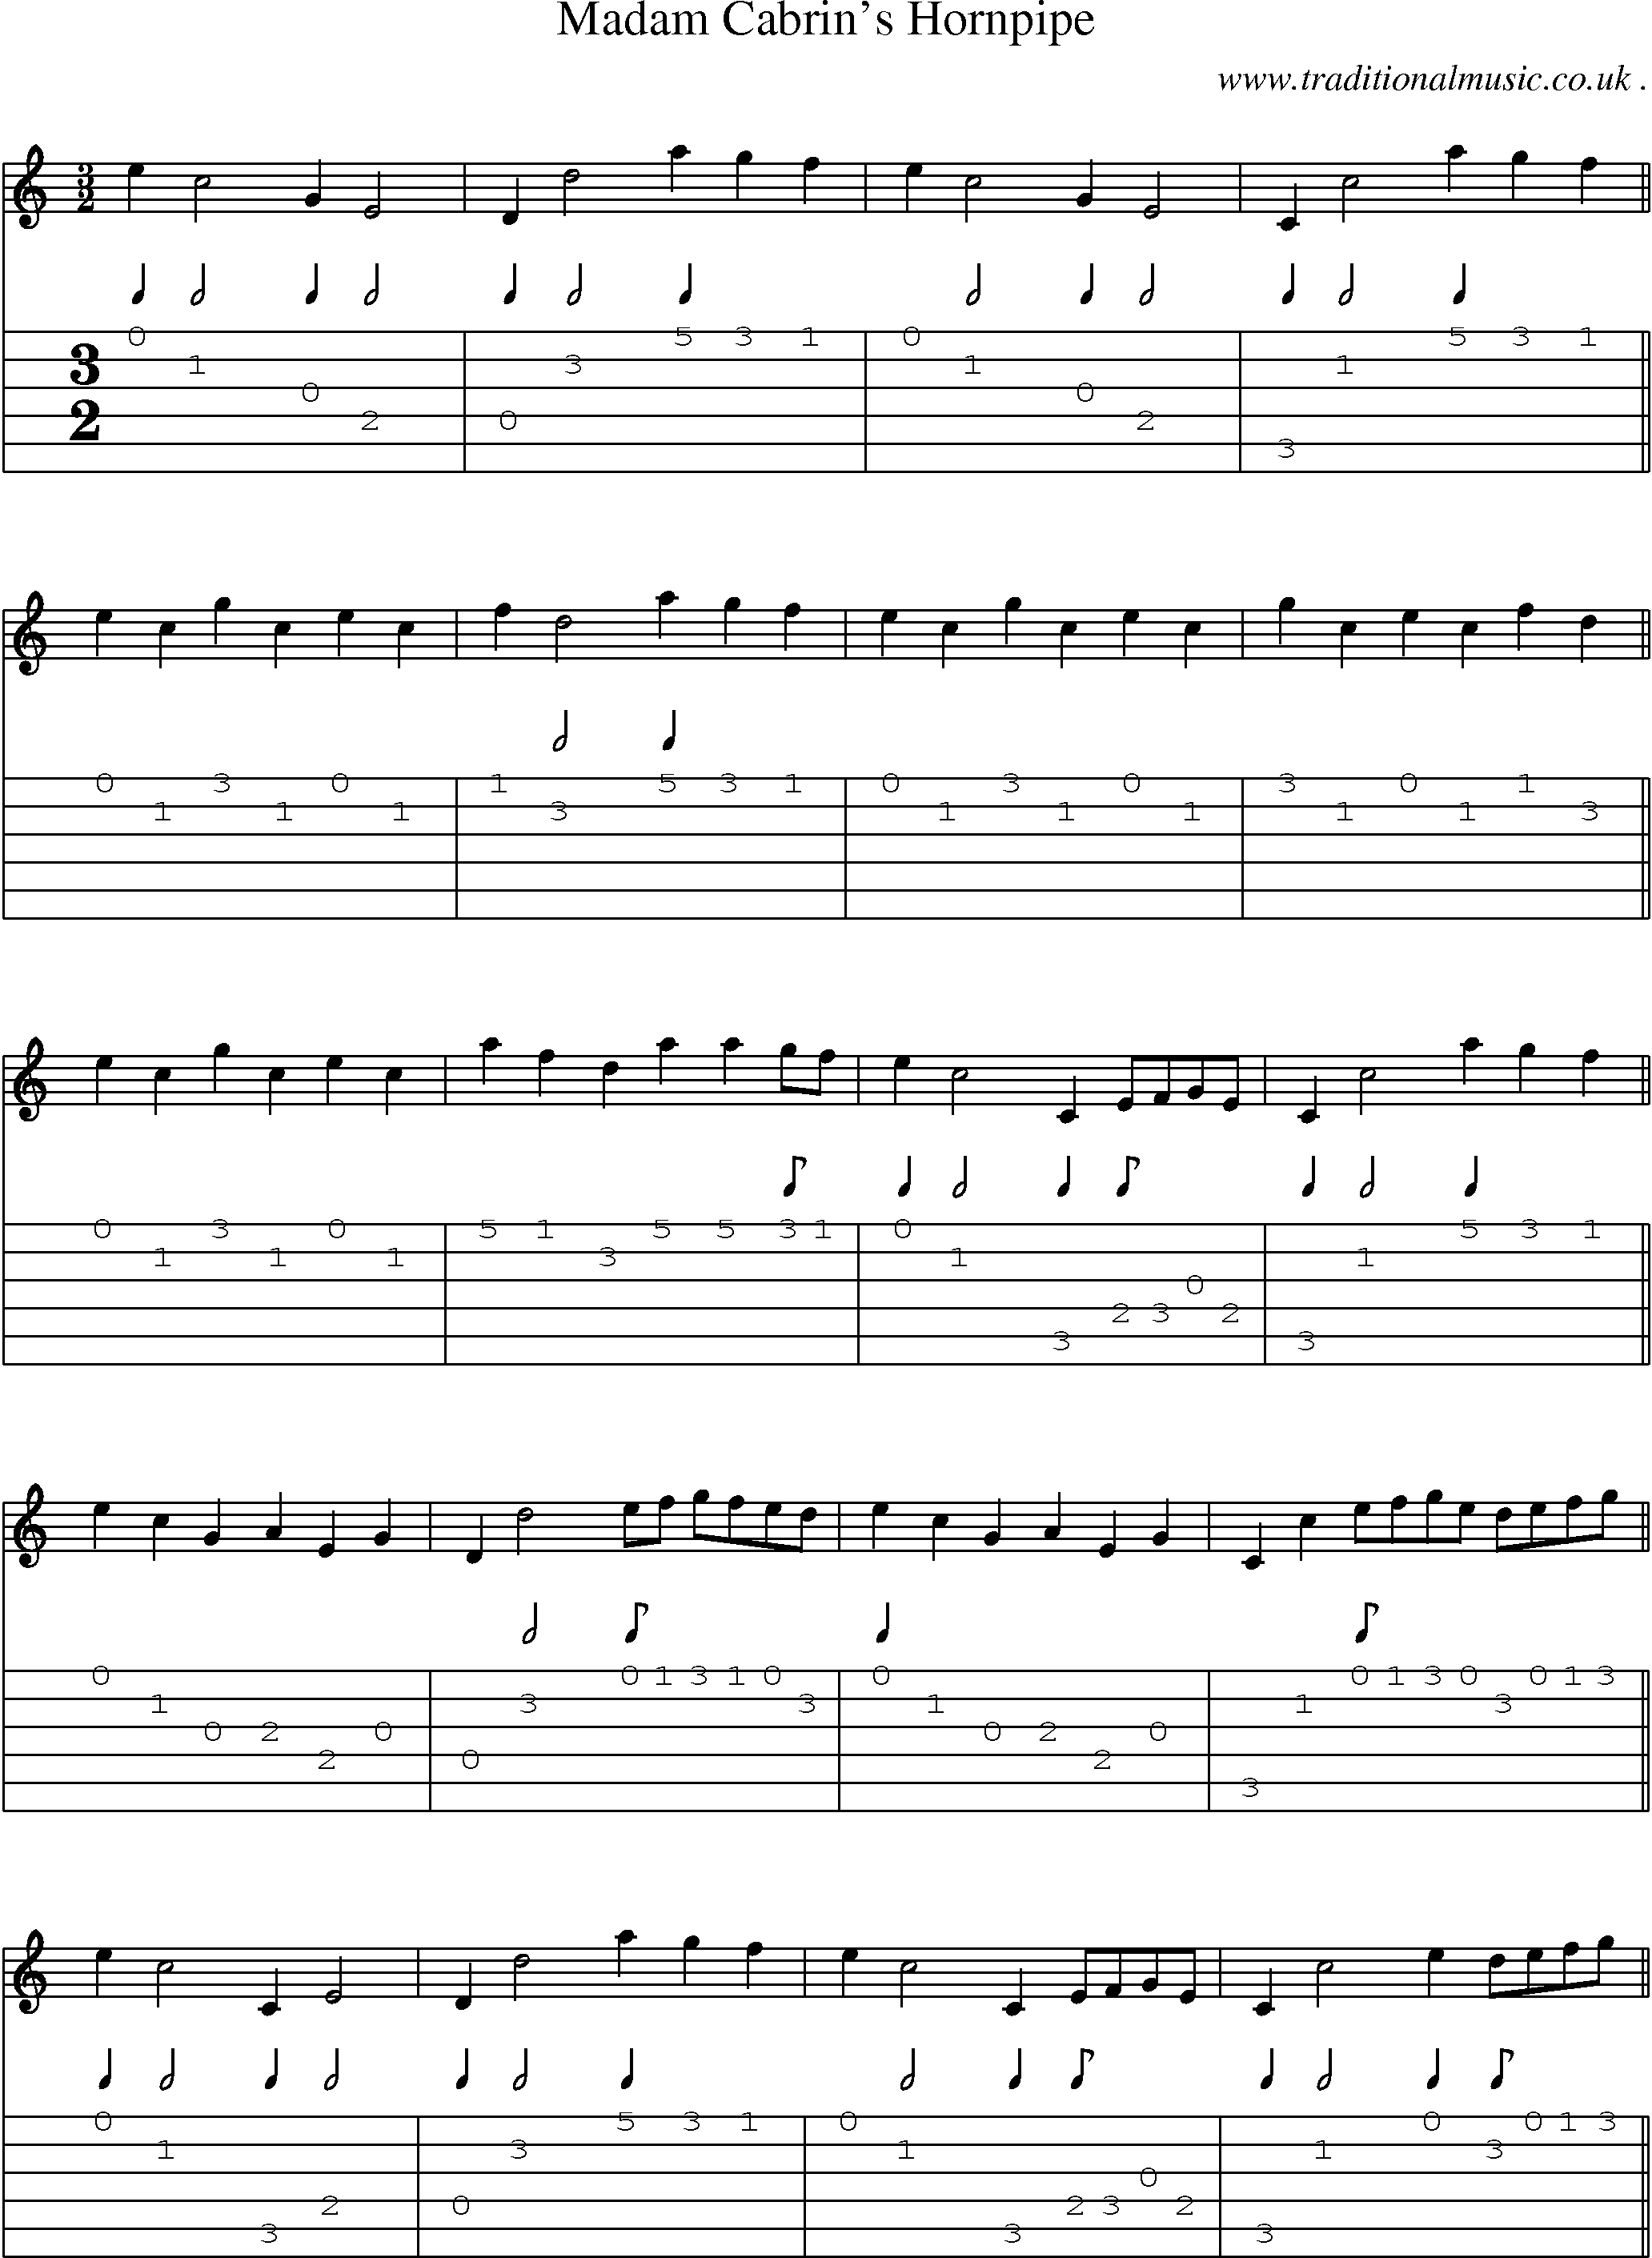 Sheet-Music and Guitar Tabs for Madam Cabrins Hornpipe